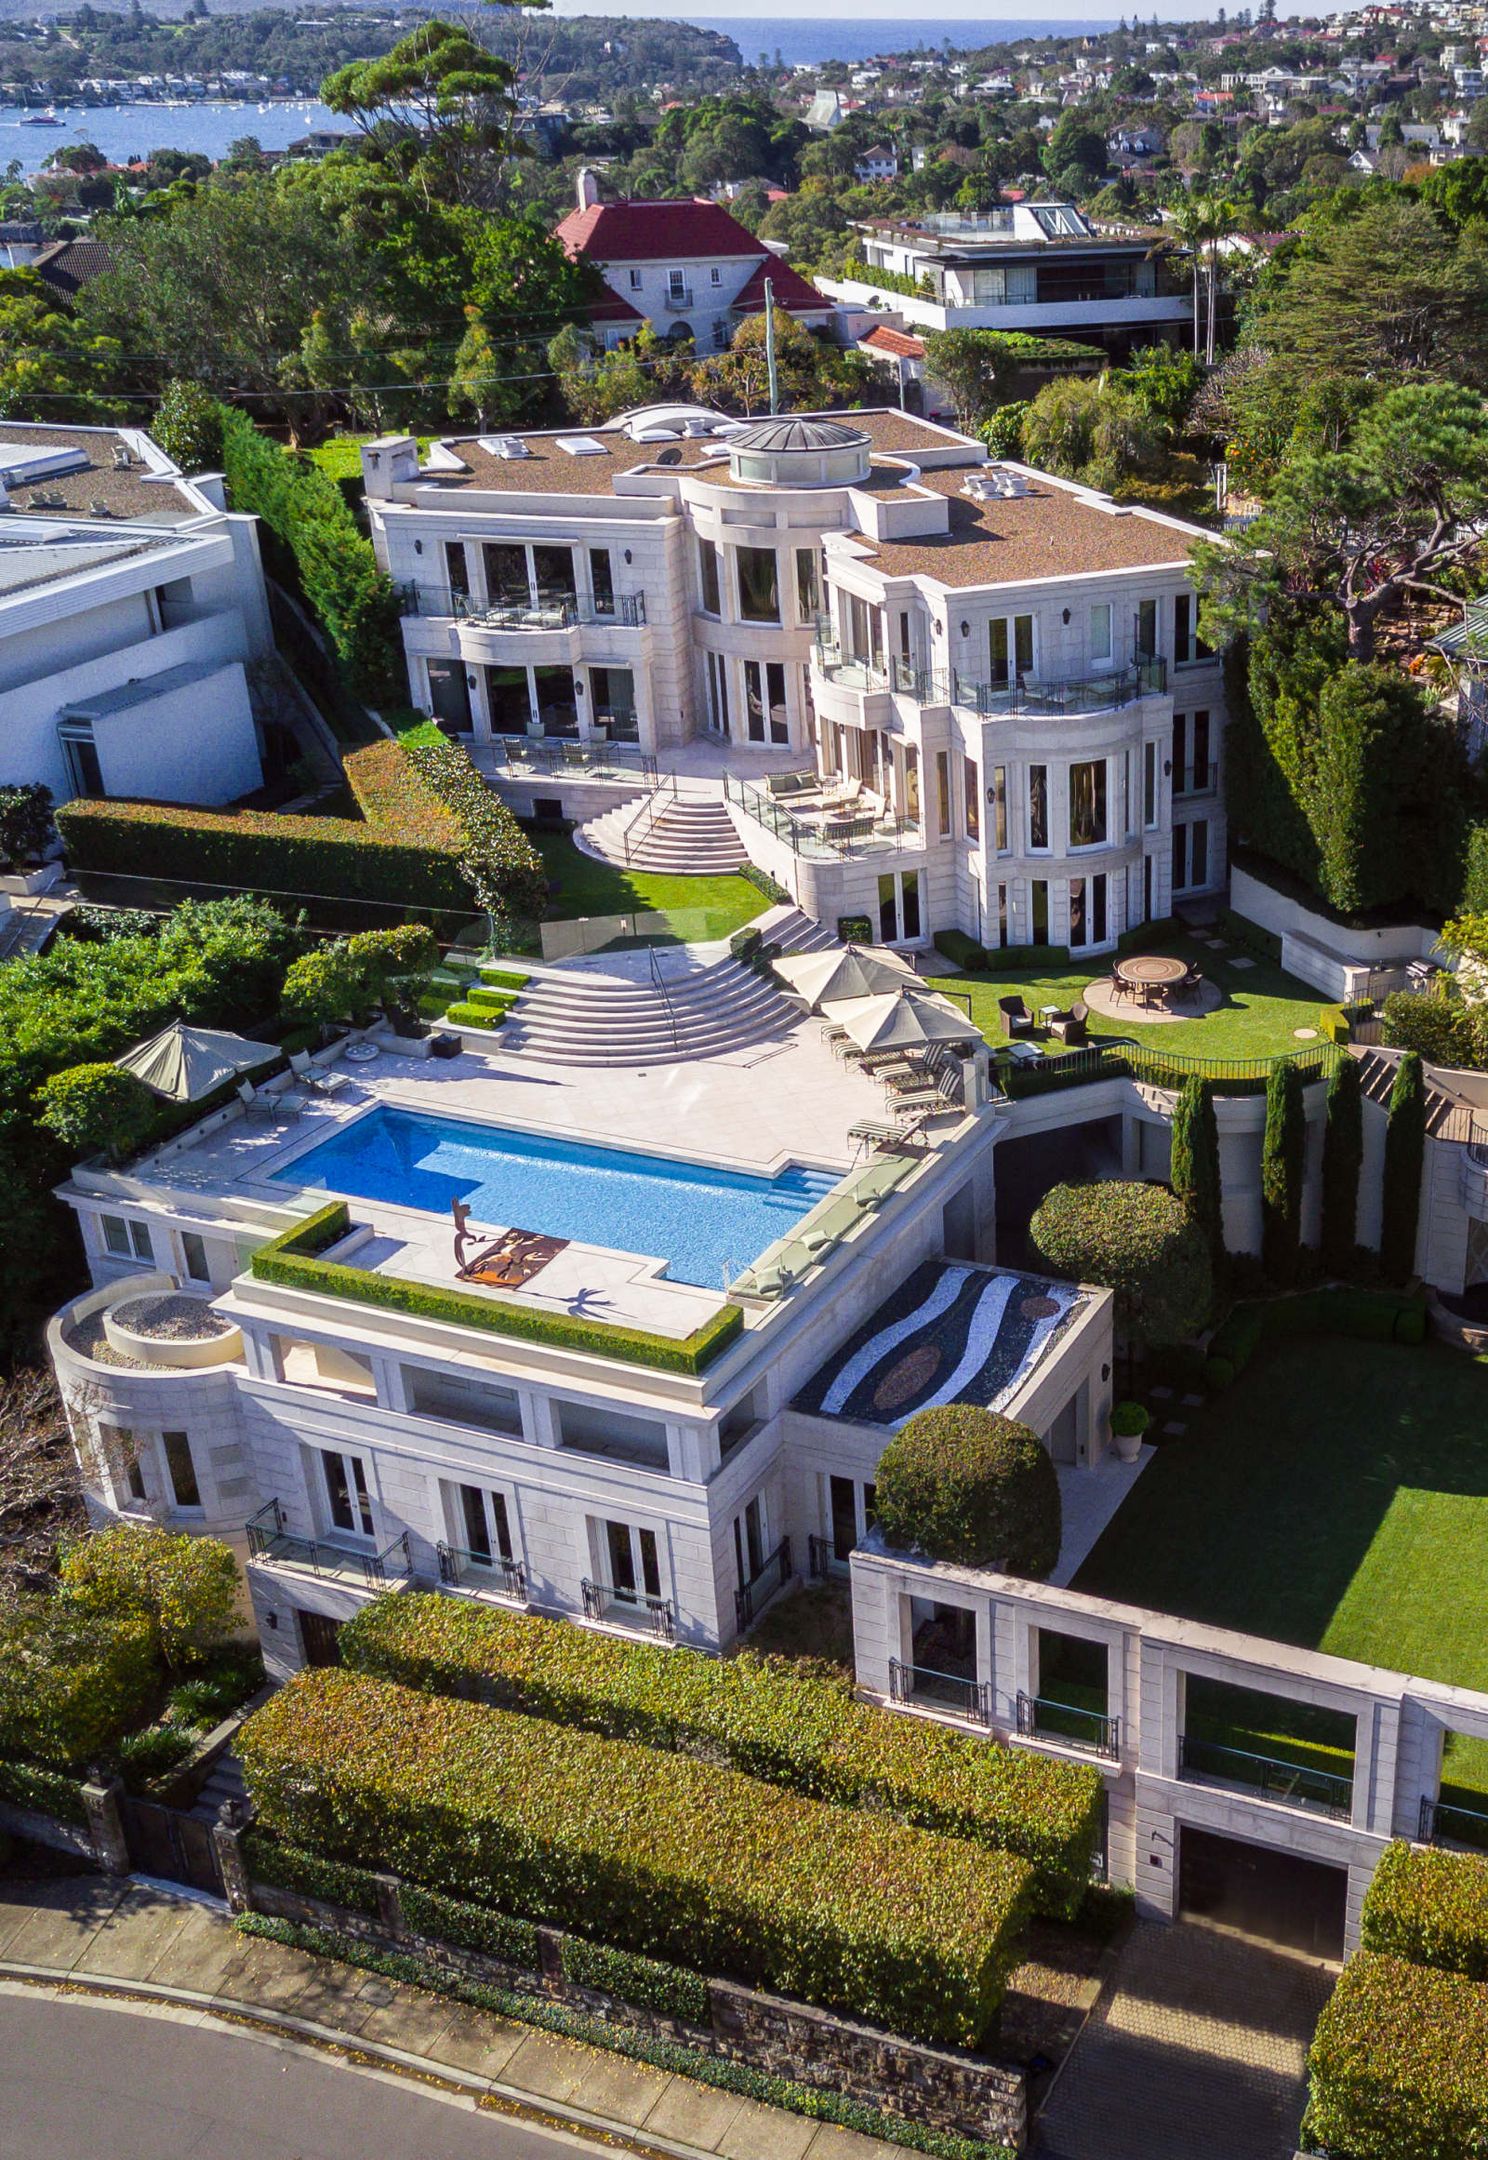 Vaucluse home now Australia's sixth most expensive after $62 million sale